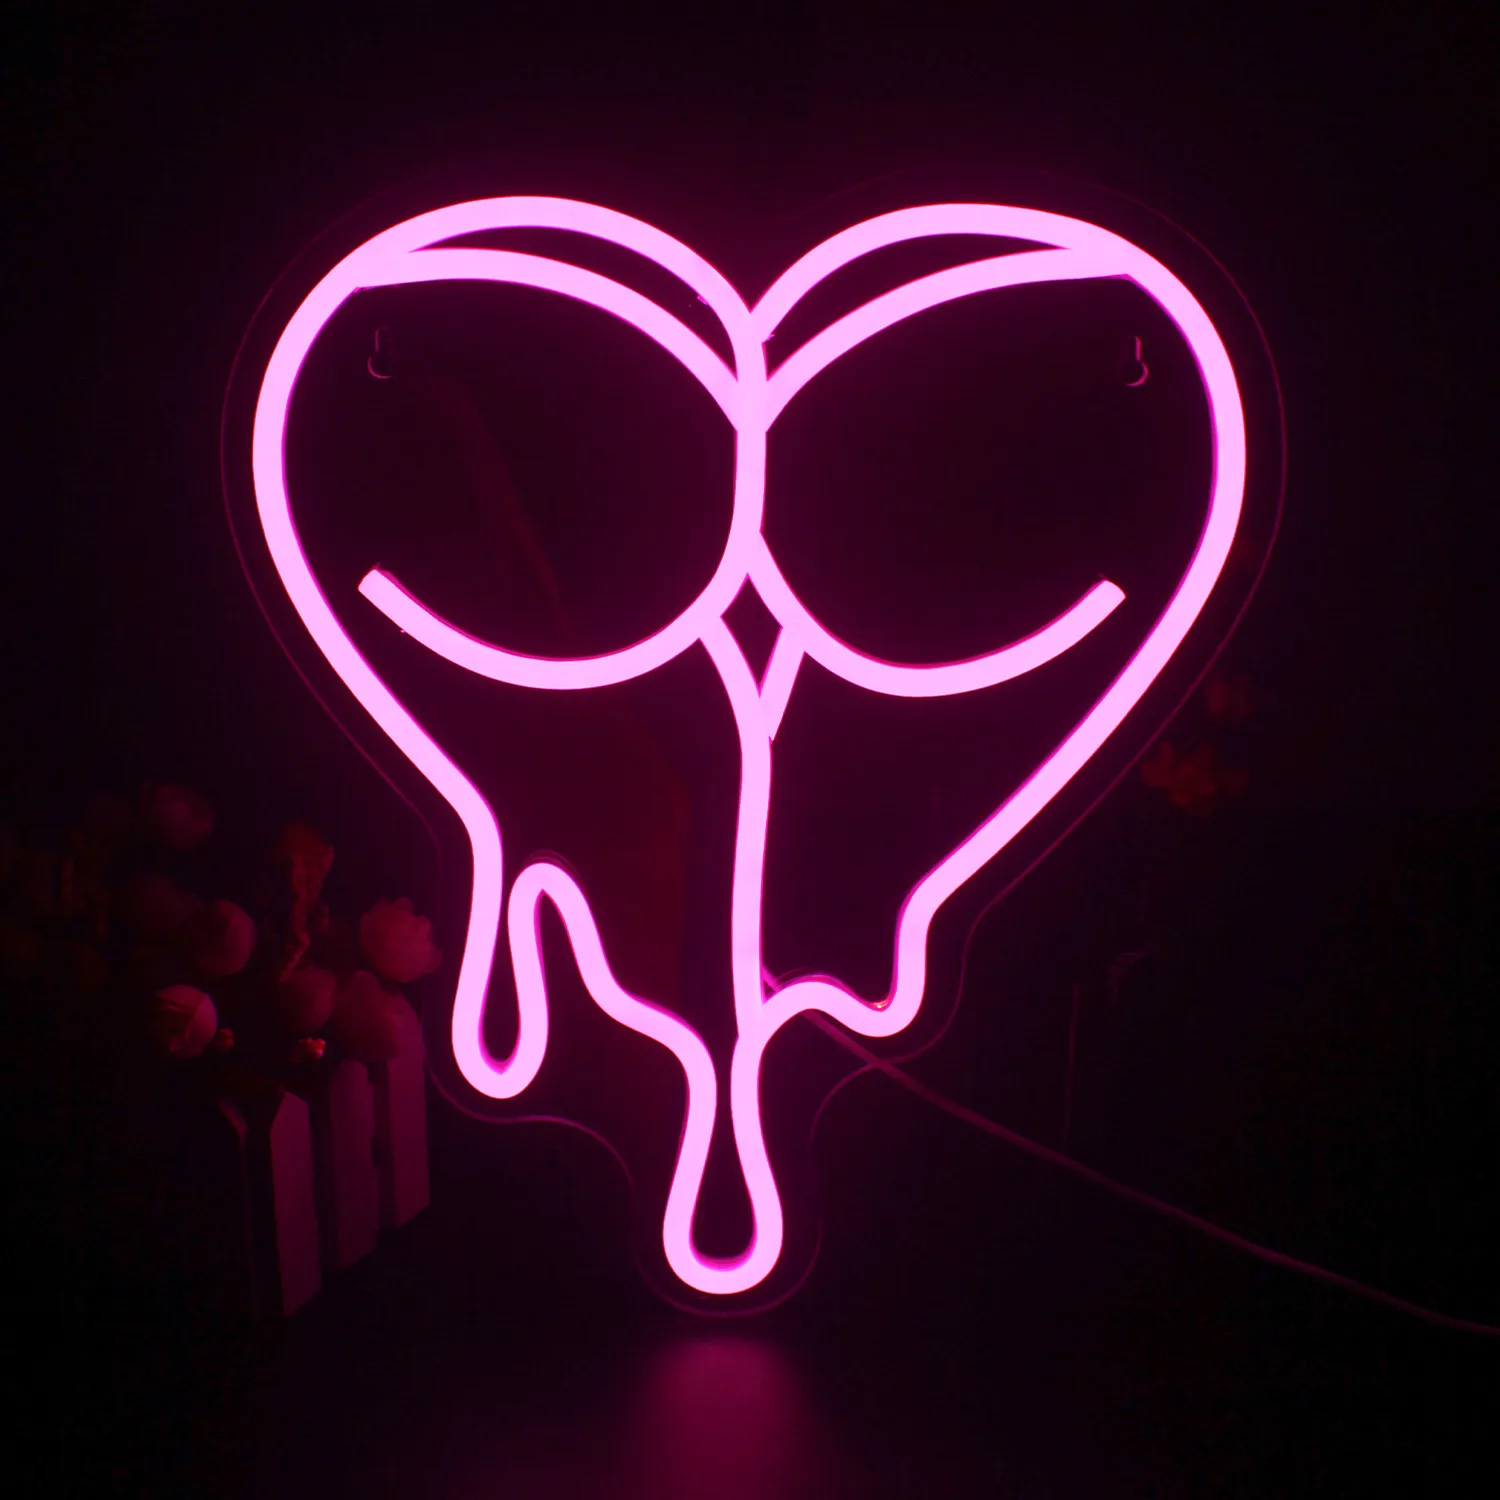 Ineonlife Neon Sign Love Ass Custom Acrylic Sign Neon Pink Lightings Goth Room Home Bar Party Room Wall Decorations For Girls custom acrylic glass box neon light art wall hanging bar lights for holiday xmas party wedding decorations personality neon sign